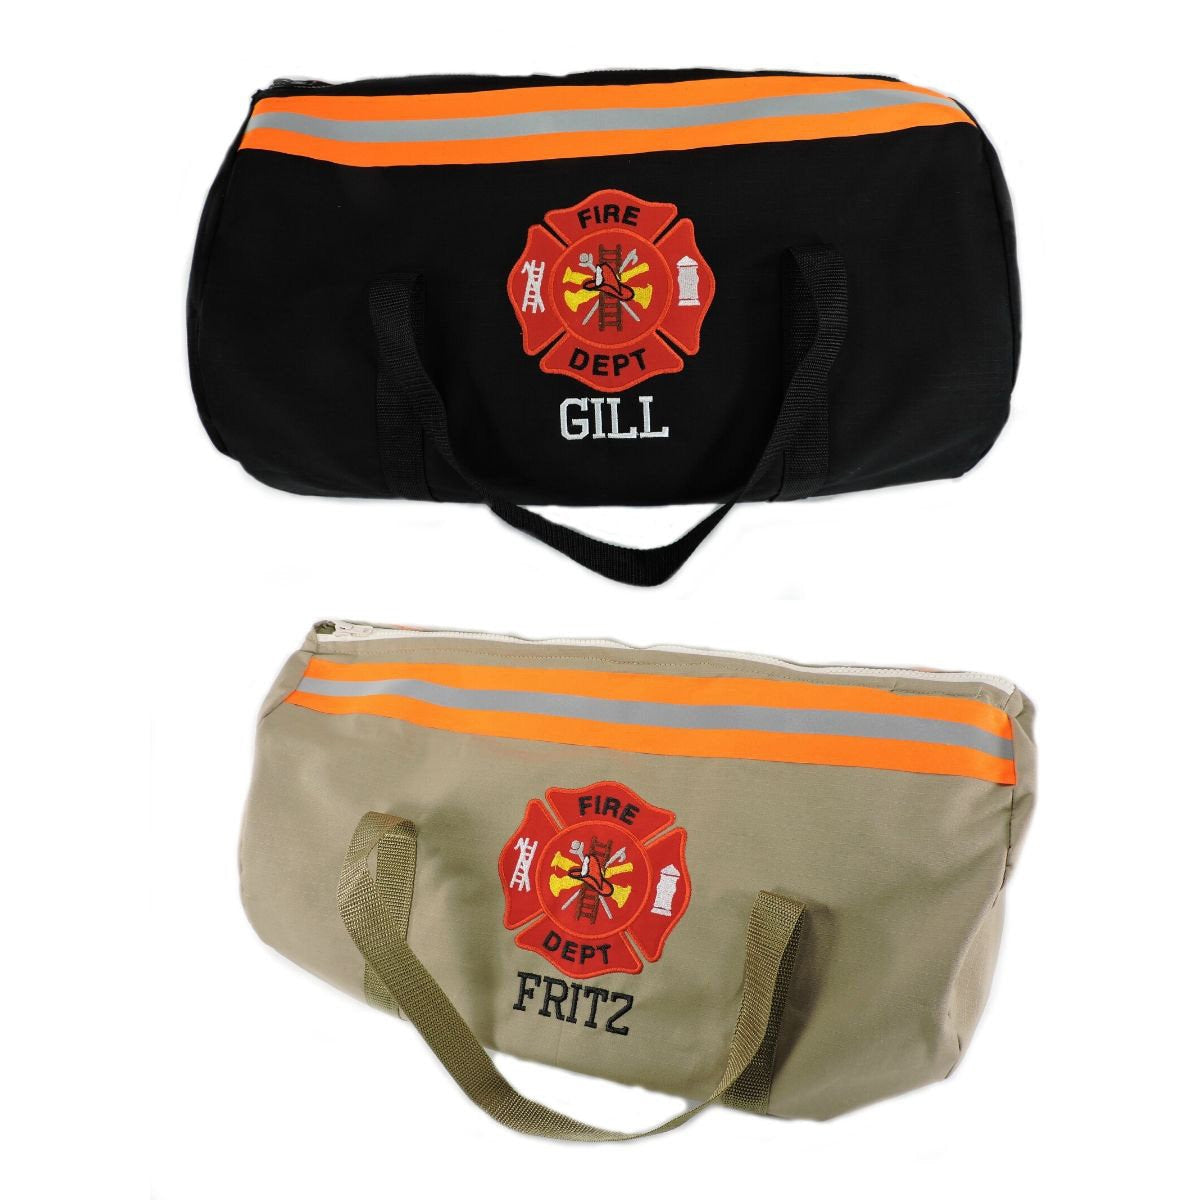 firefighter duffel bags with neon orange tape